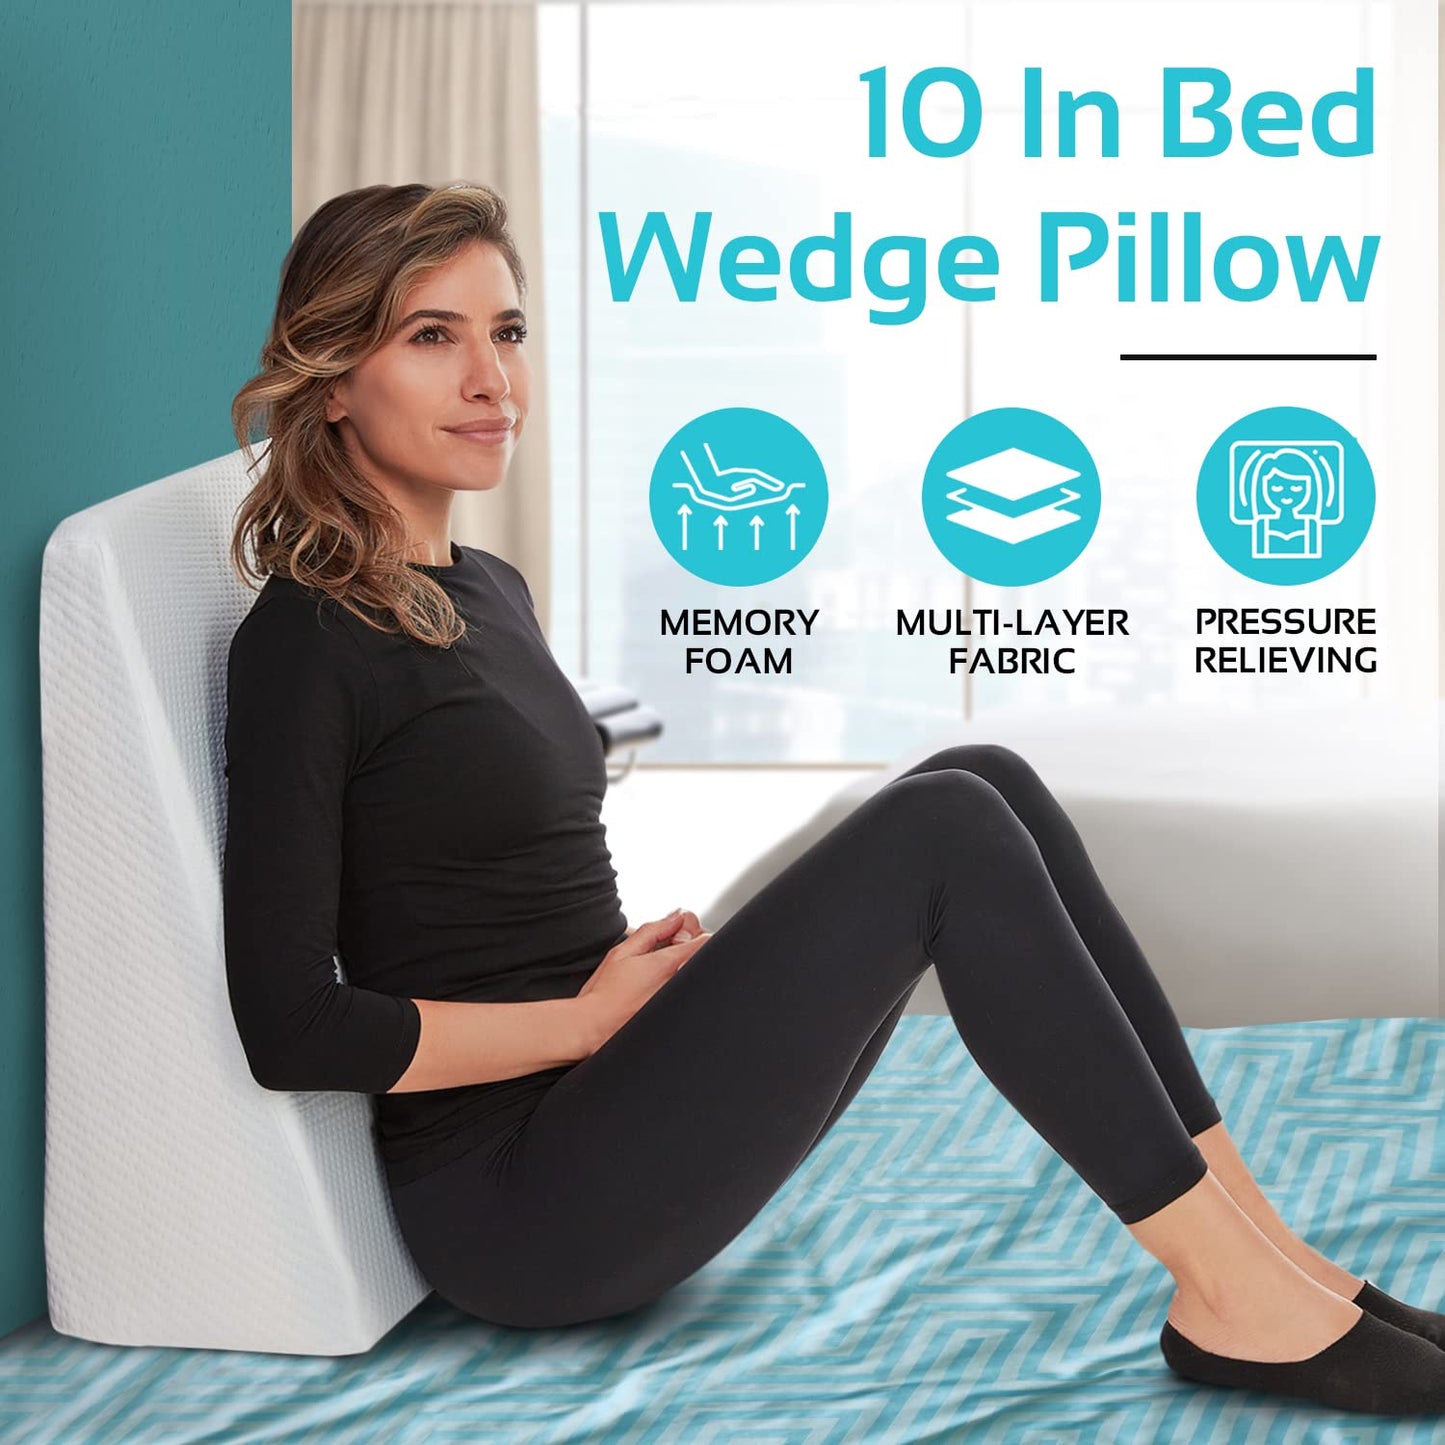 Bed Wedge Pillow - 10 Inch Wedge Pillow For Sleeping with Memory Foam Top, Lower Back Pain Support Cushion, Sleep Apnea Pillow, Pregnancy, Acid Reflux, GERD, Heartburn, Anti Snore, Removable Cover